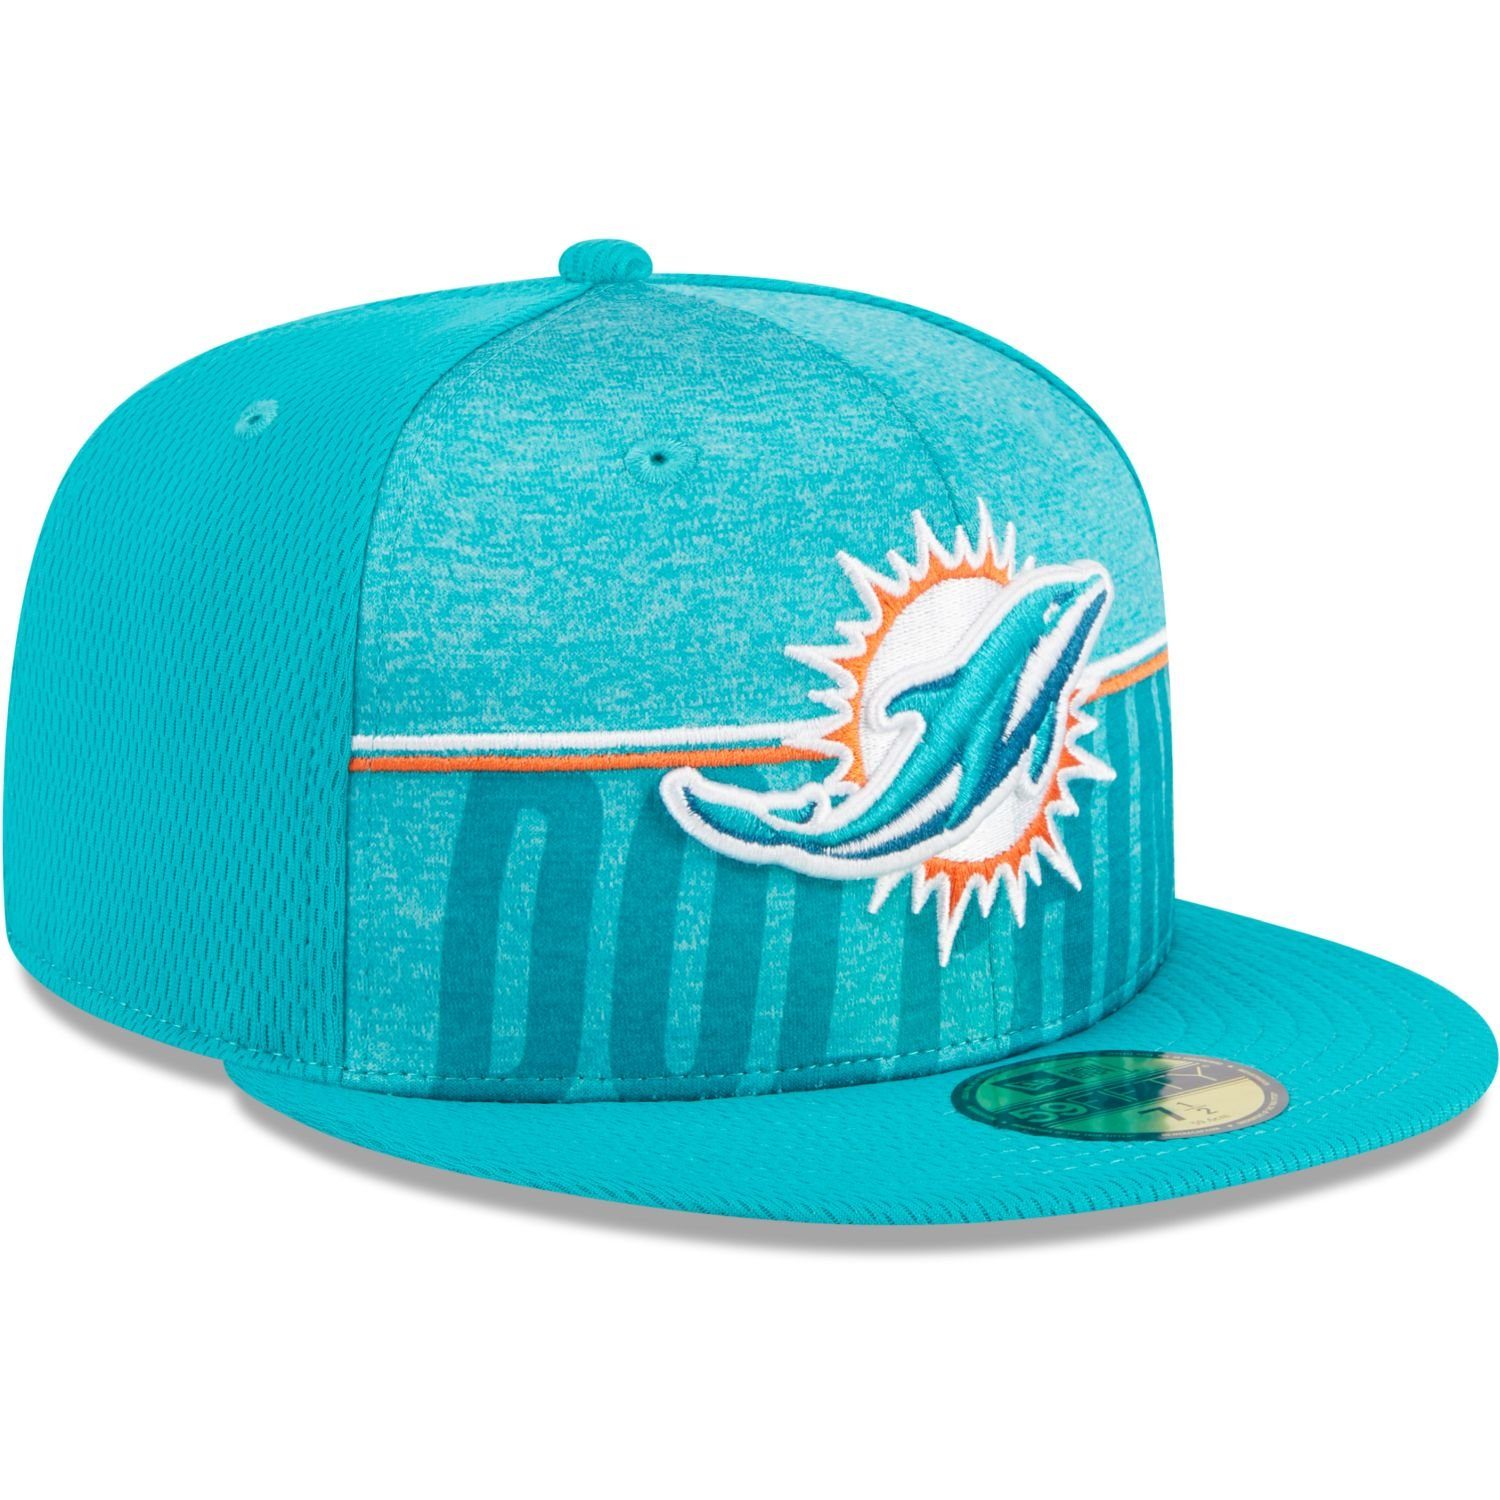 NFL Fitted Era Cap Dolphins New 59Fifty TRAINING Miami